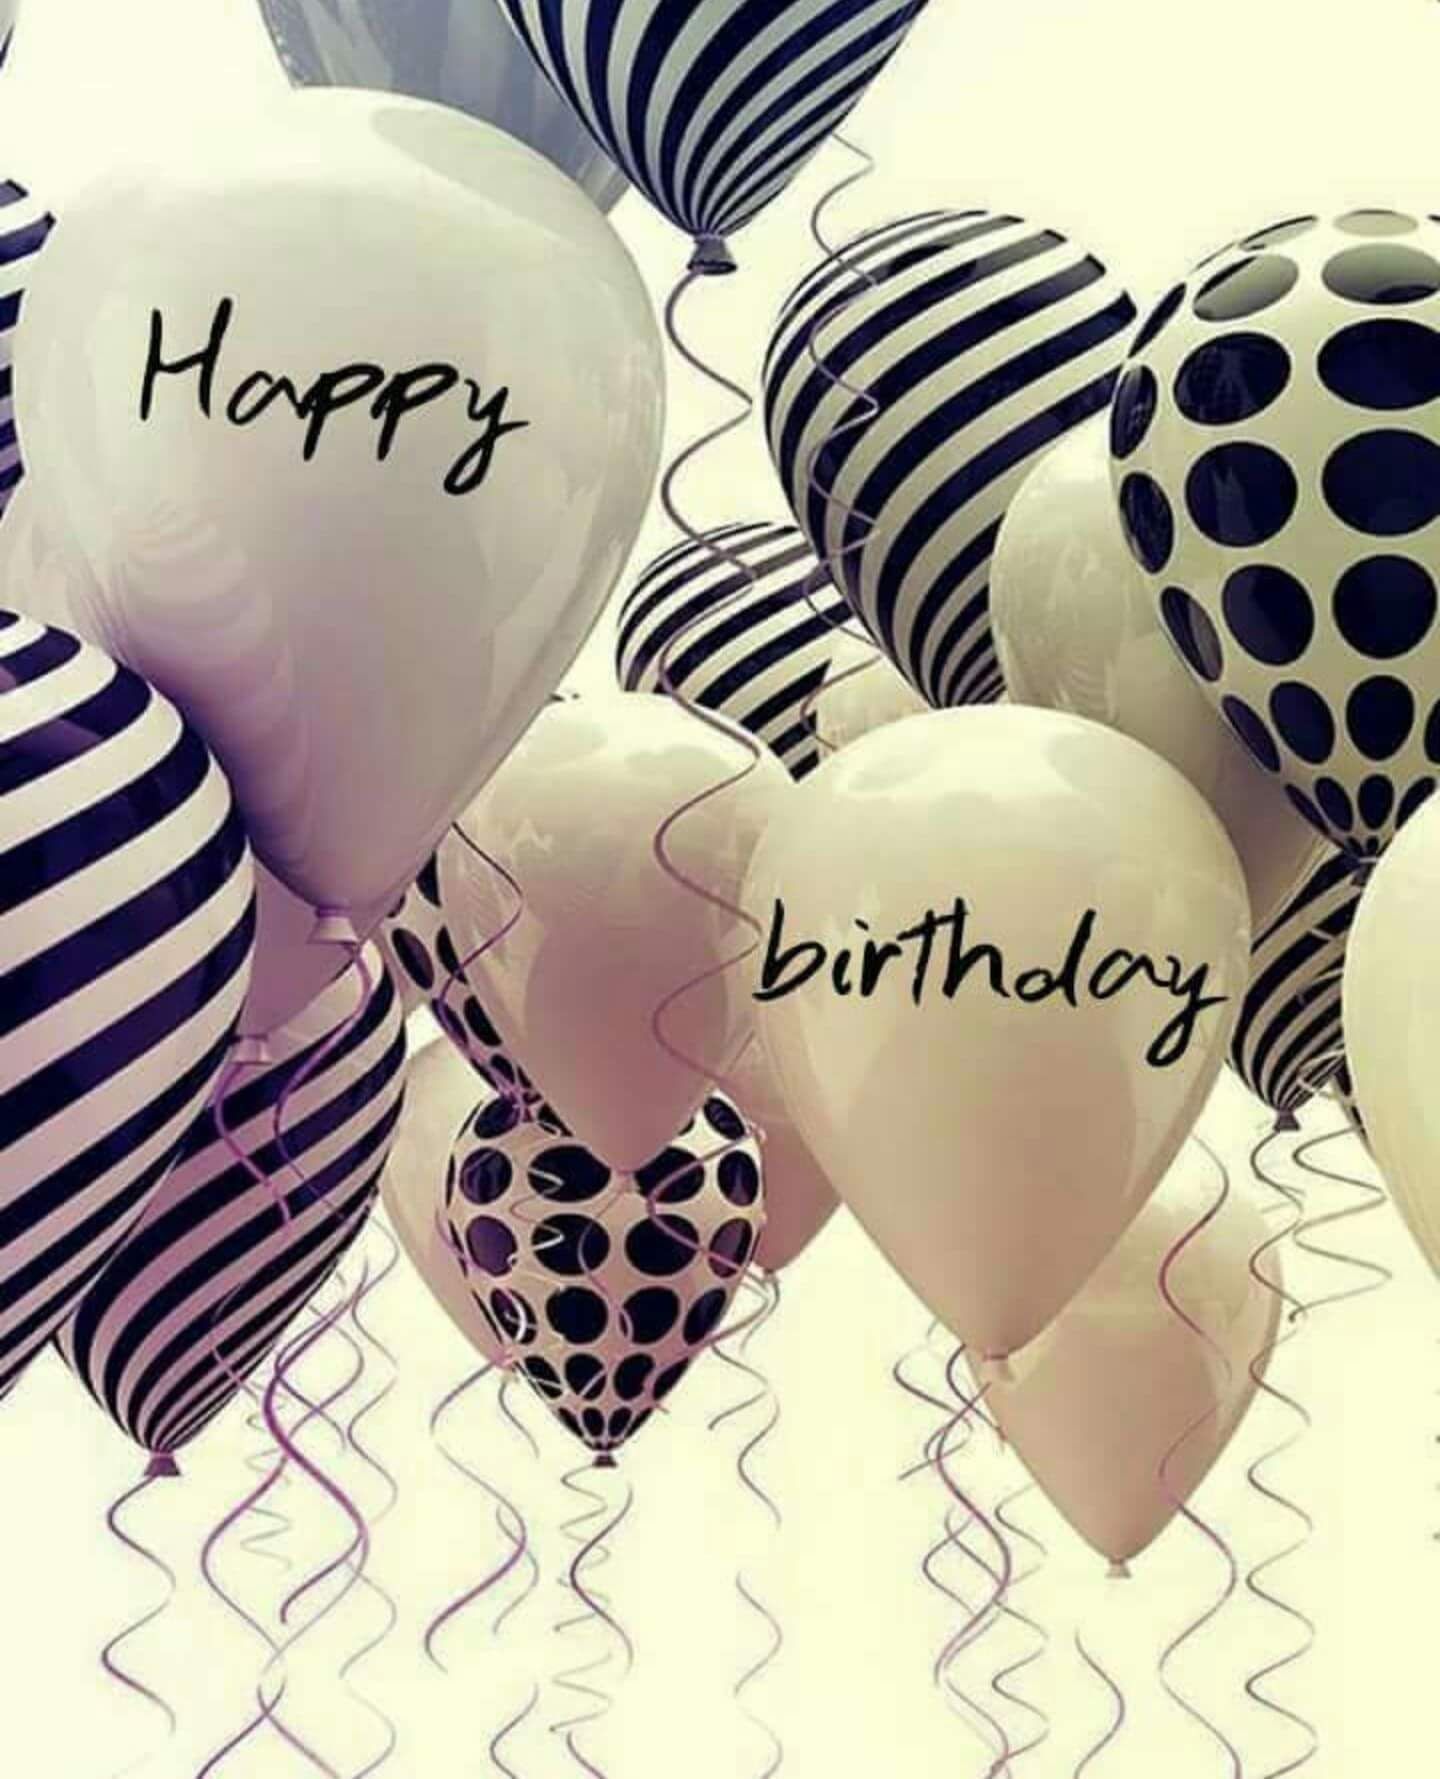 Happy birthday balloons in black and white. - Balloons